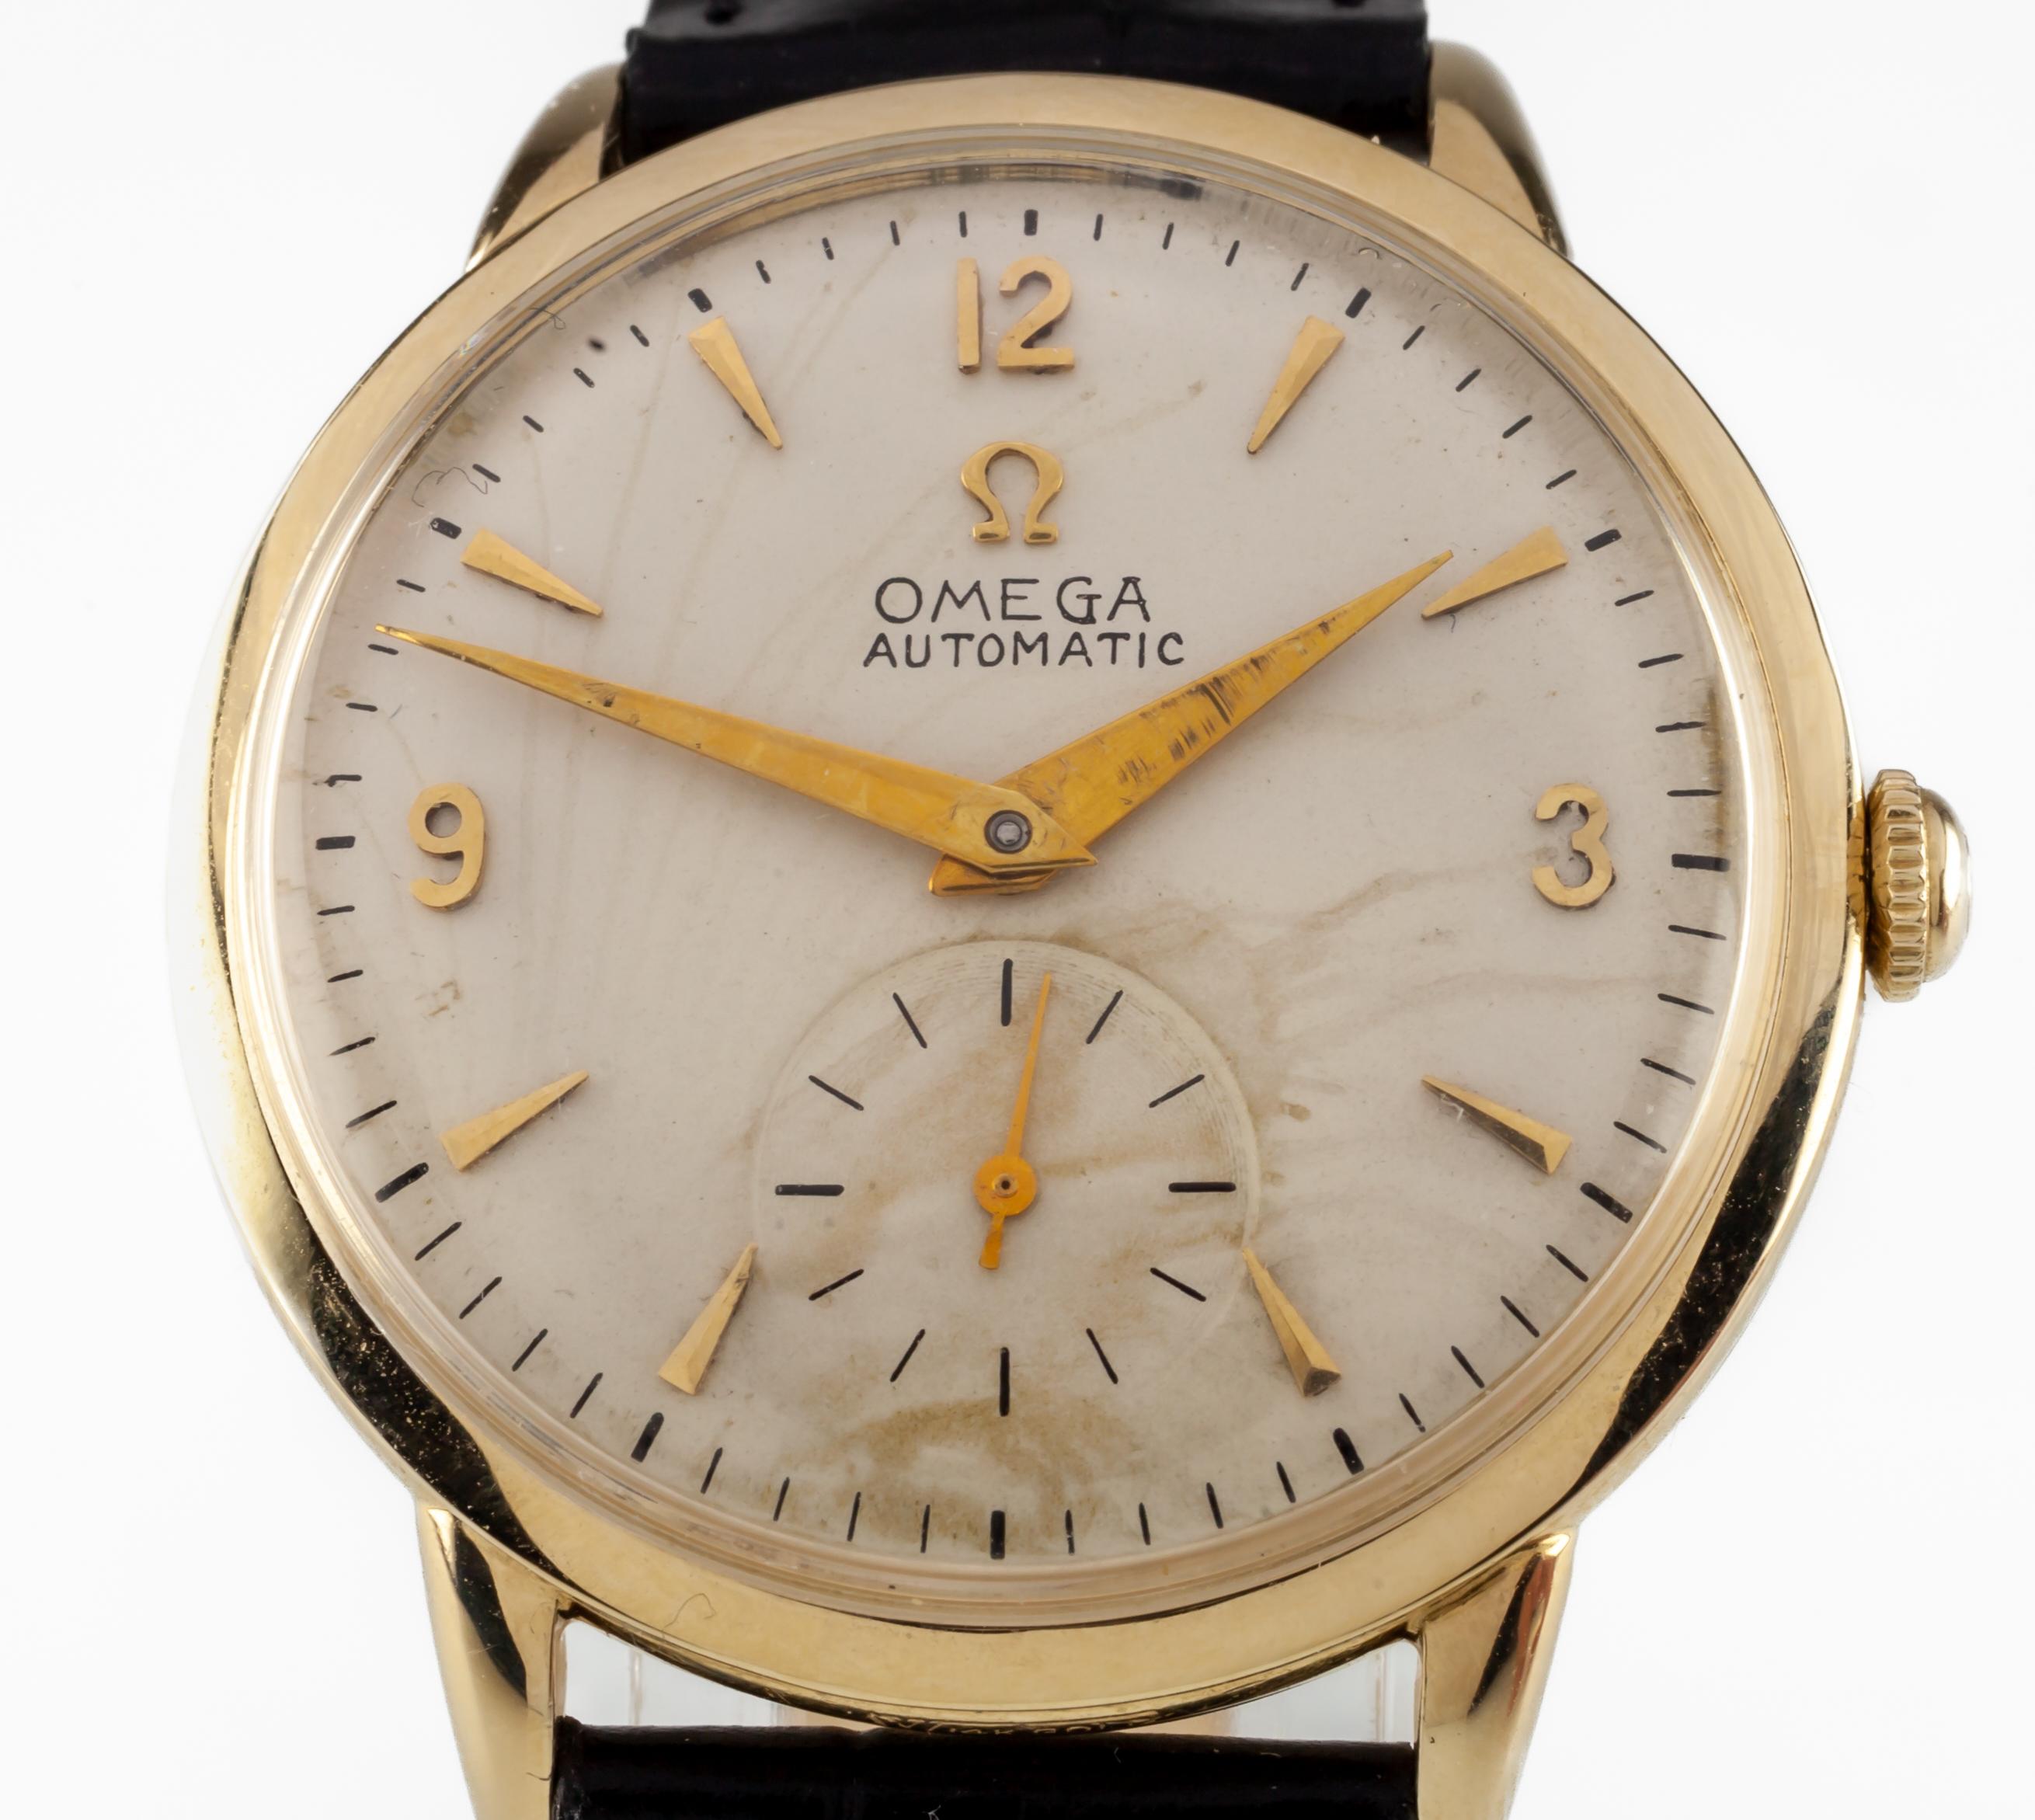 Omega 14k Yellow Gold Automatic Men's Vintage Watch 342 w/ Leather Band
Movement #342
Movement Serial #128109XX
Case #F65116-W219538
Year: 1950

14k Yellow Gold Round Case
32 mm in Diameter (33 mm w/ Crown)
Lug-to-Lug Distance = 38 mm
Lug-to-Lug